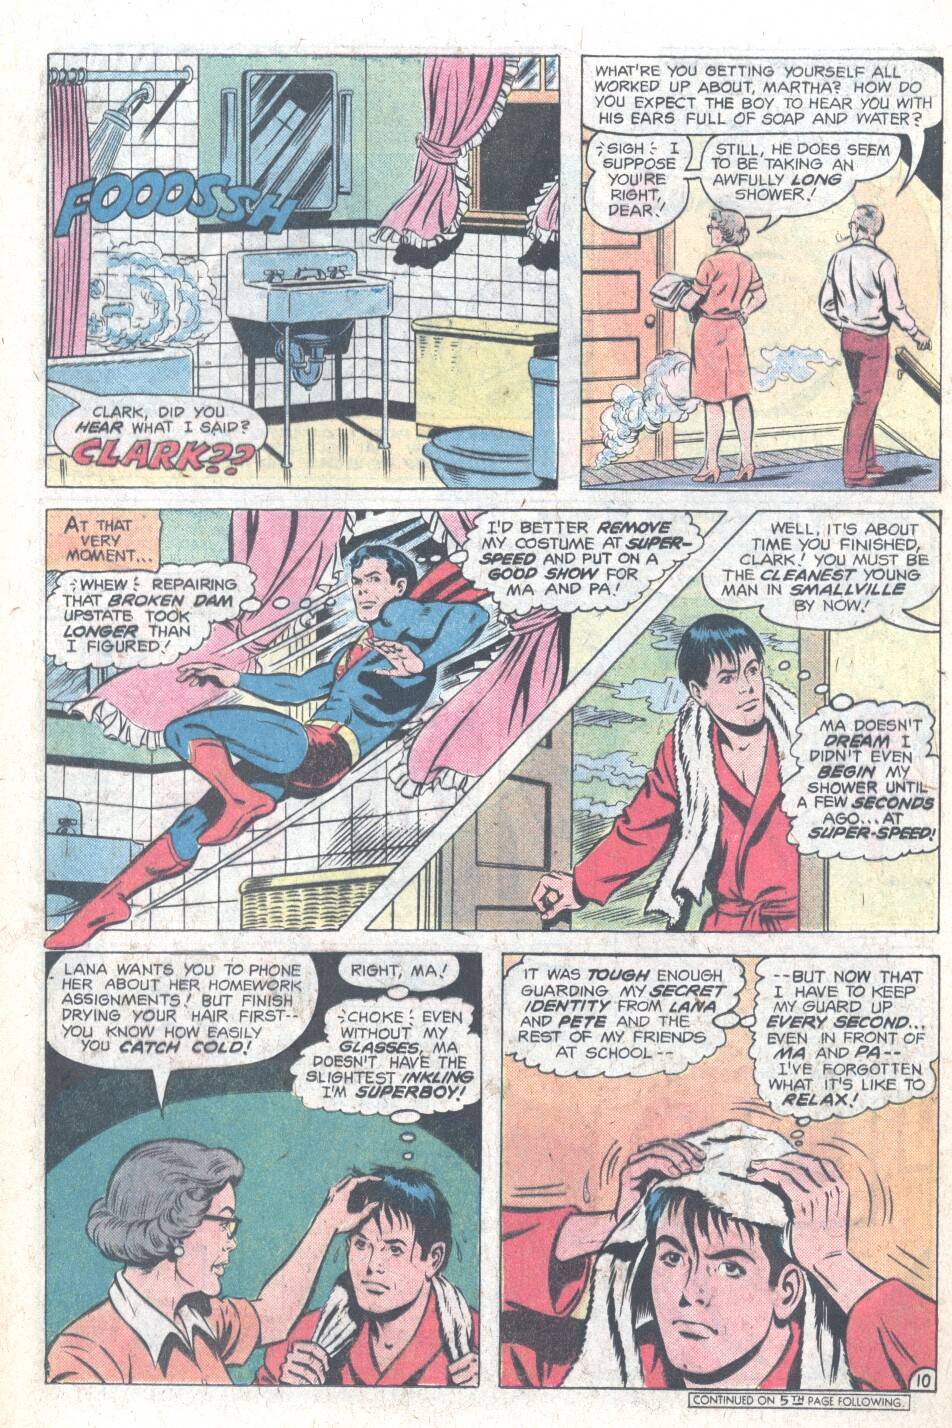 The New Adventures of Superboy 8 Page 10